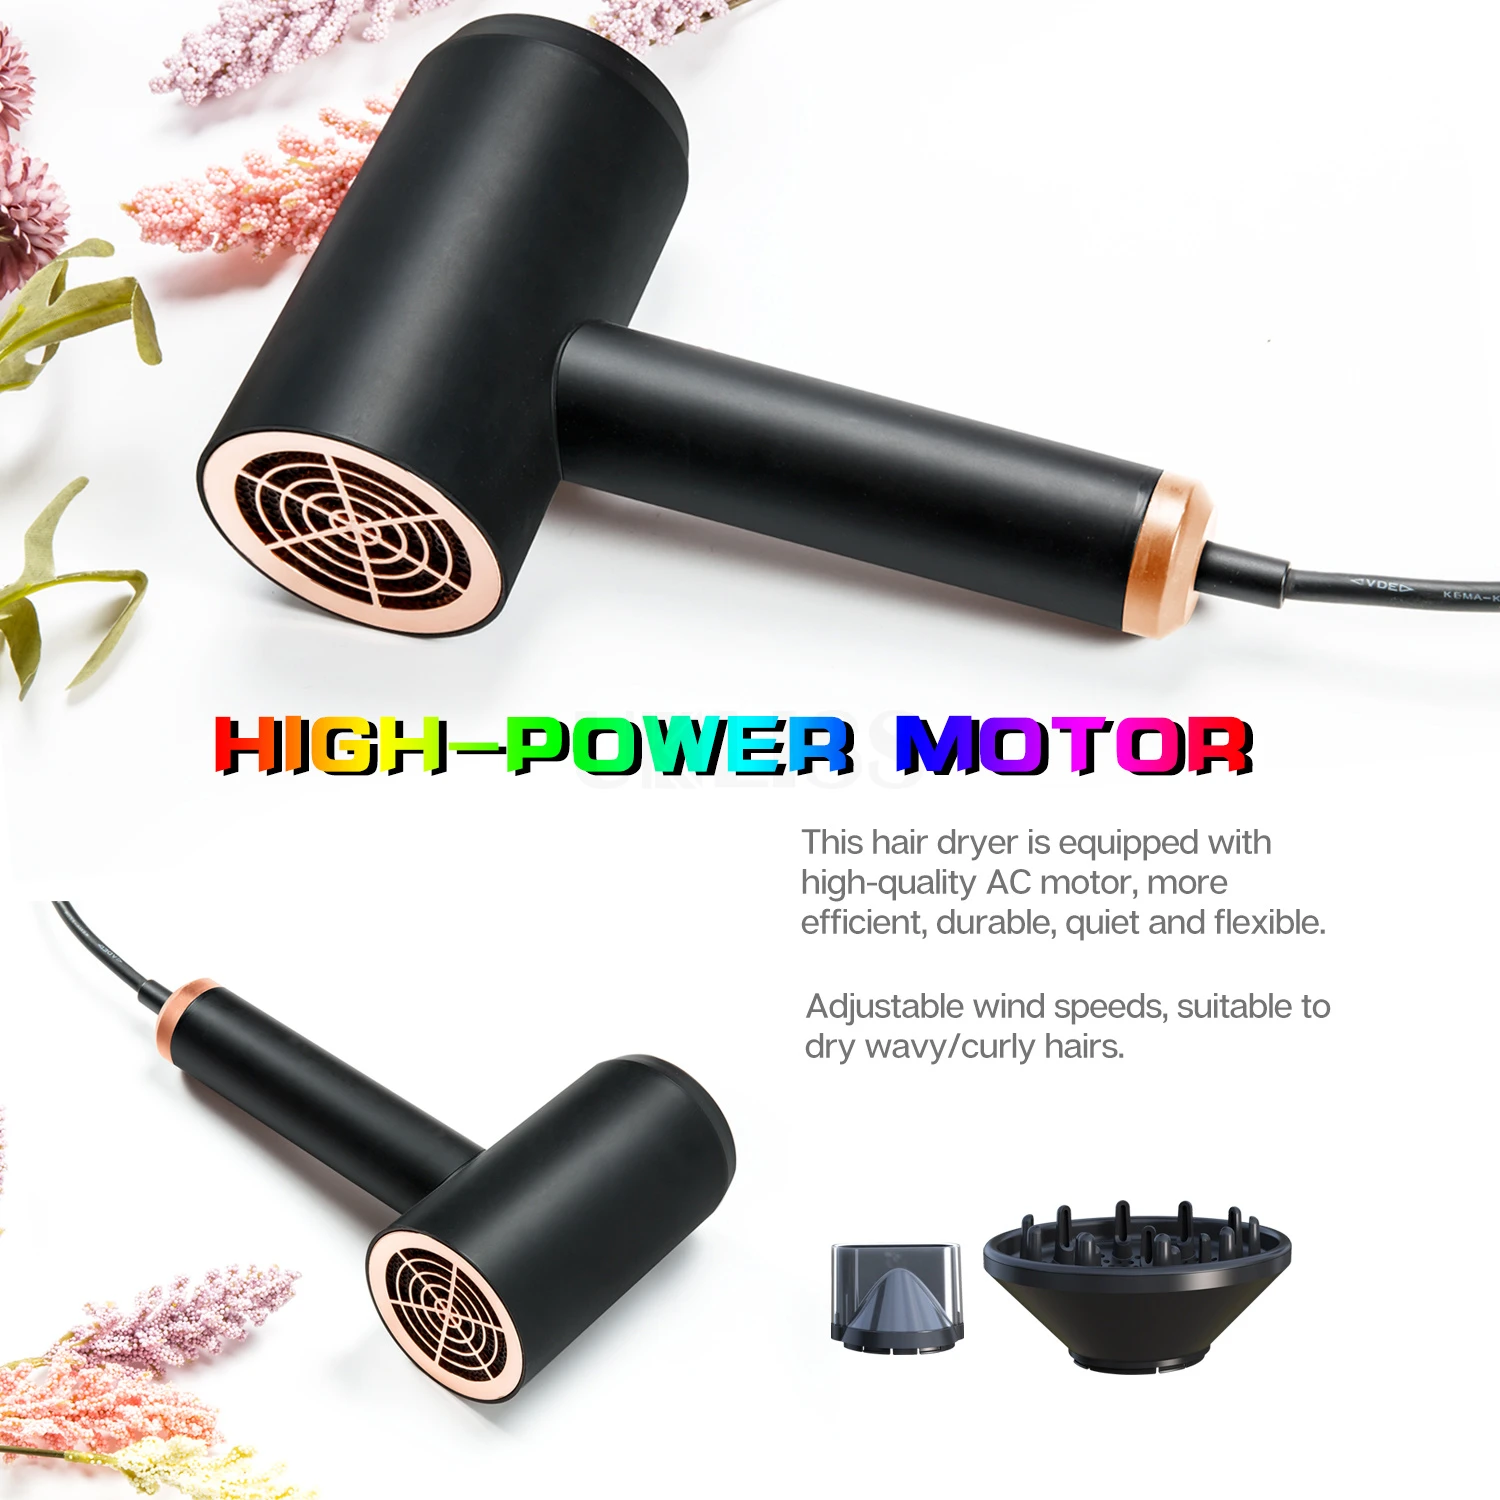 Manufacture 1600W Powerful Ionic Hair Dryer Blower Electric Hair Dryer With Led Temperature Display And Optional Diffuser